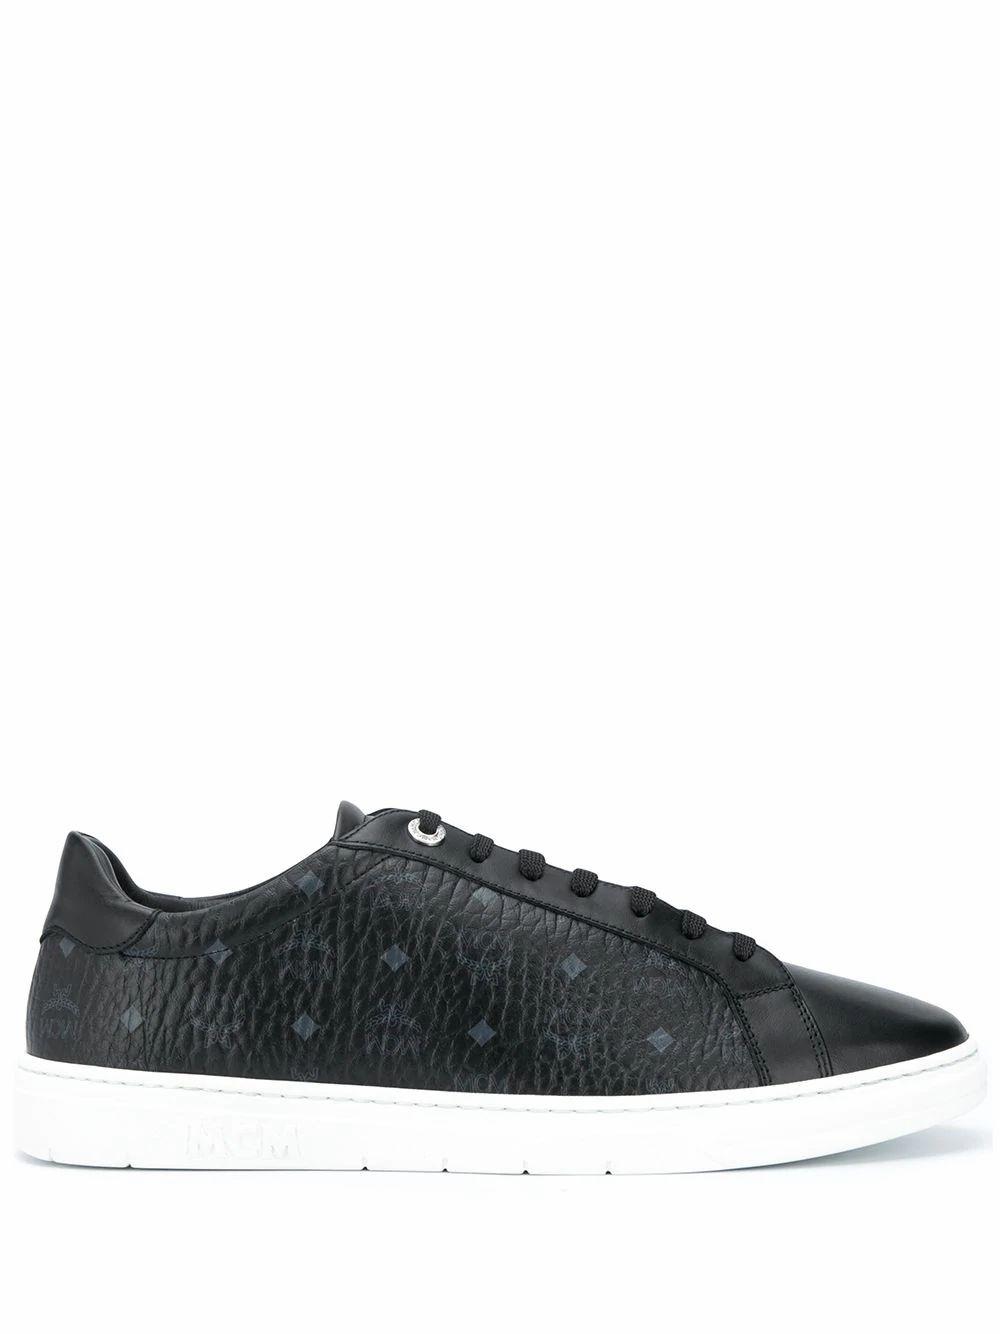 MCM Leather Sneakers in Black for Men - Lyst